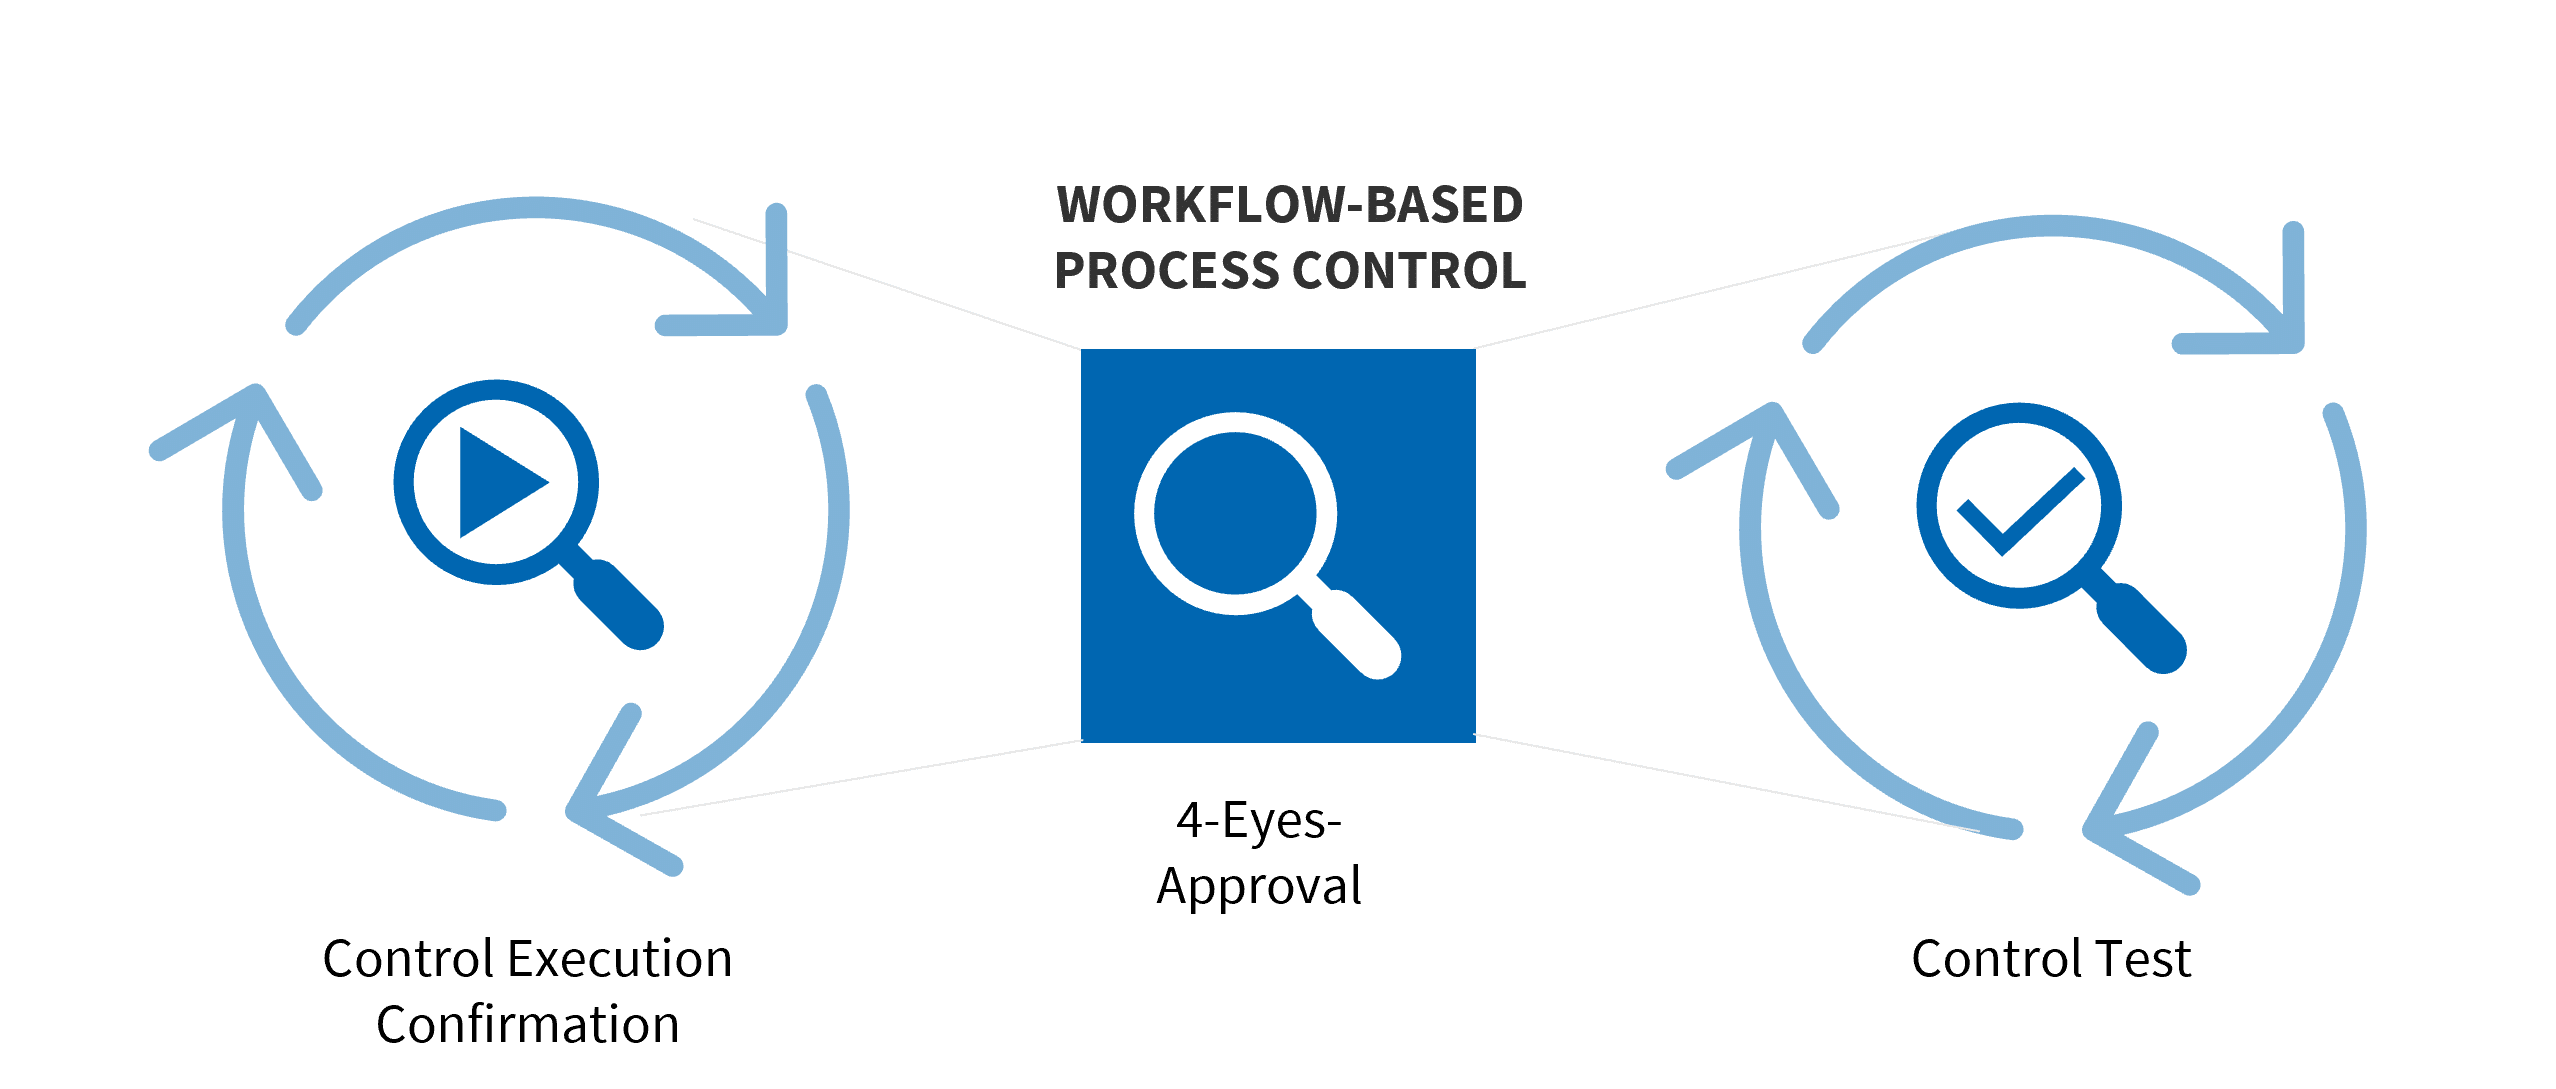 Image 2: The Workflow-based process control